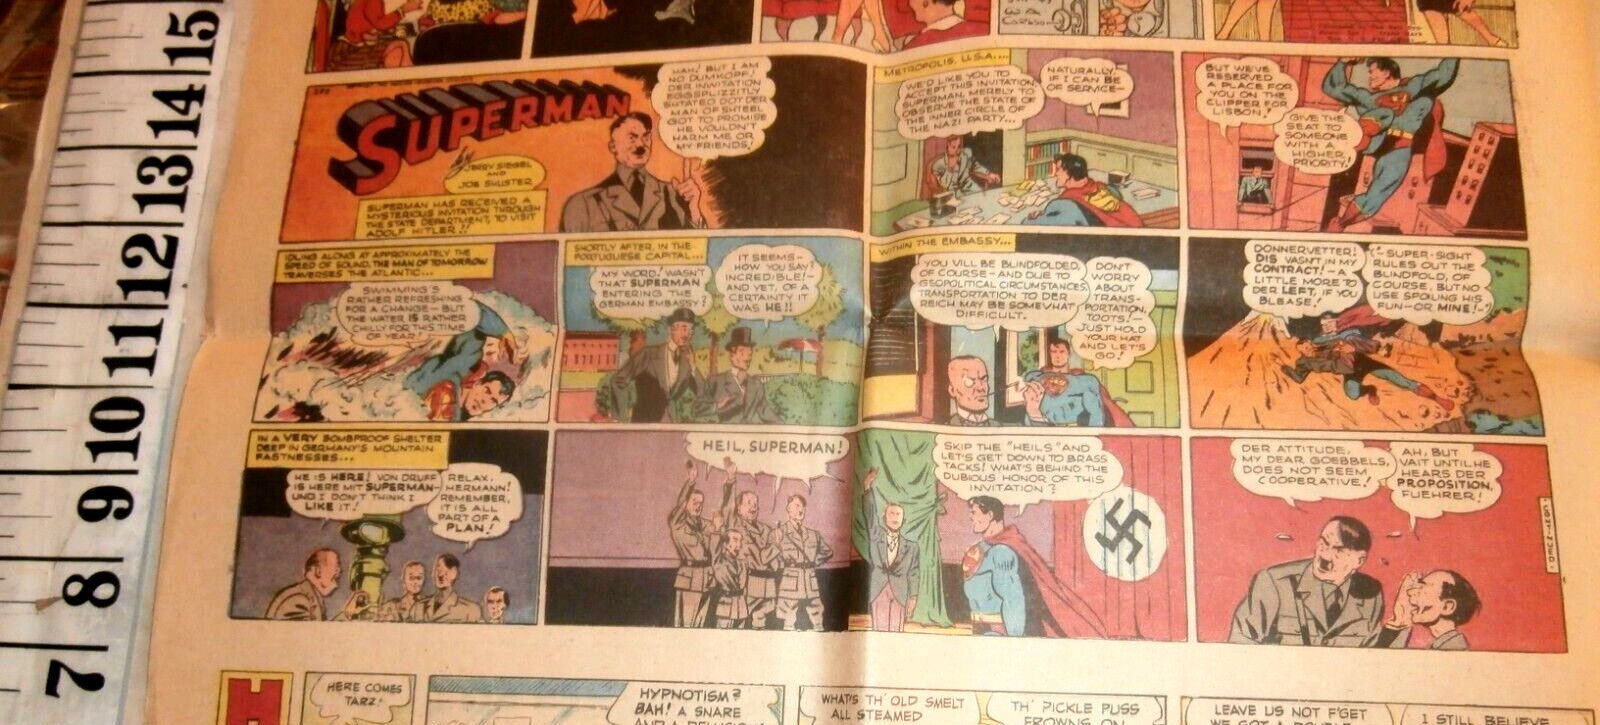 1945 SUPERMAN- HITLER SUNDAY COMIC- COMPLETE SECTION